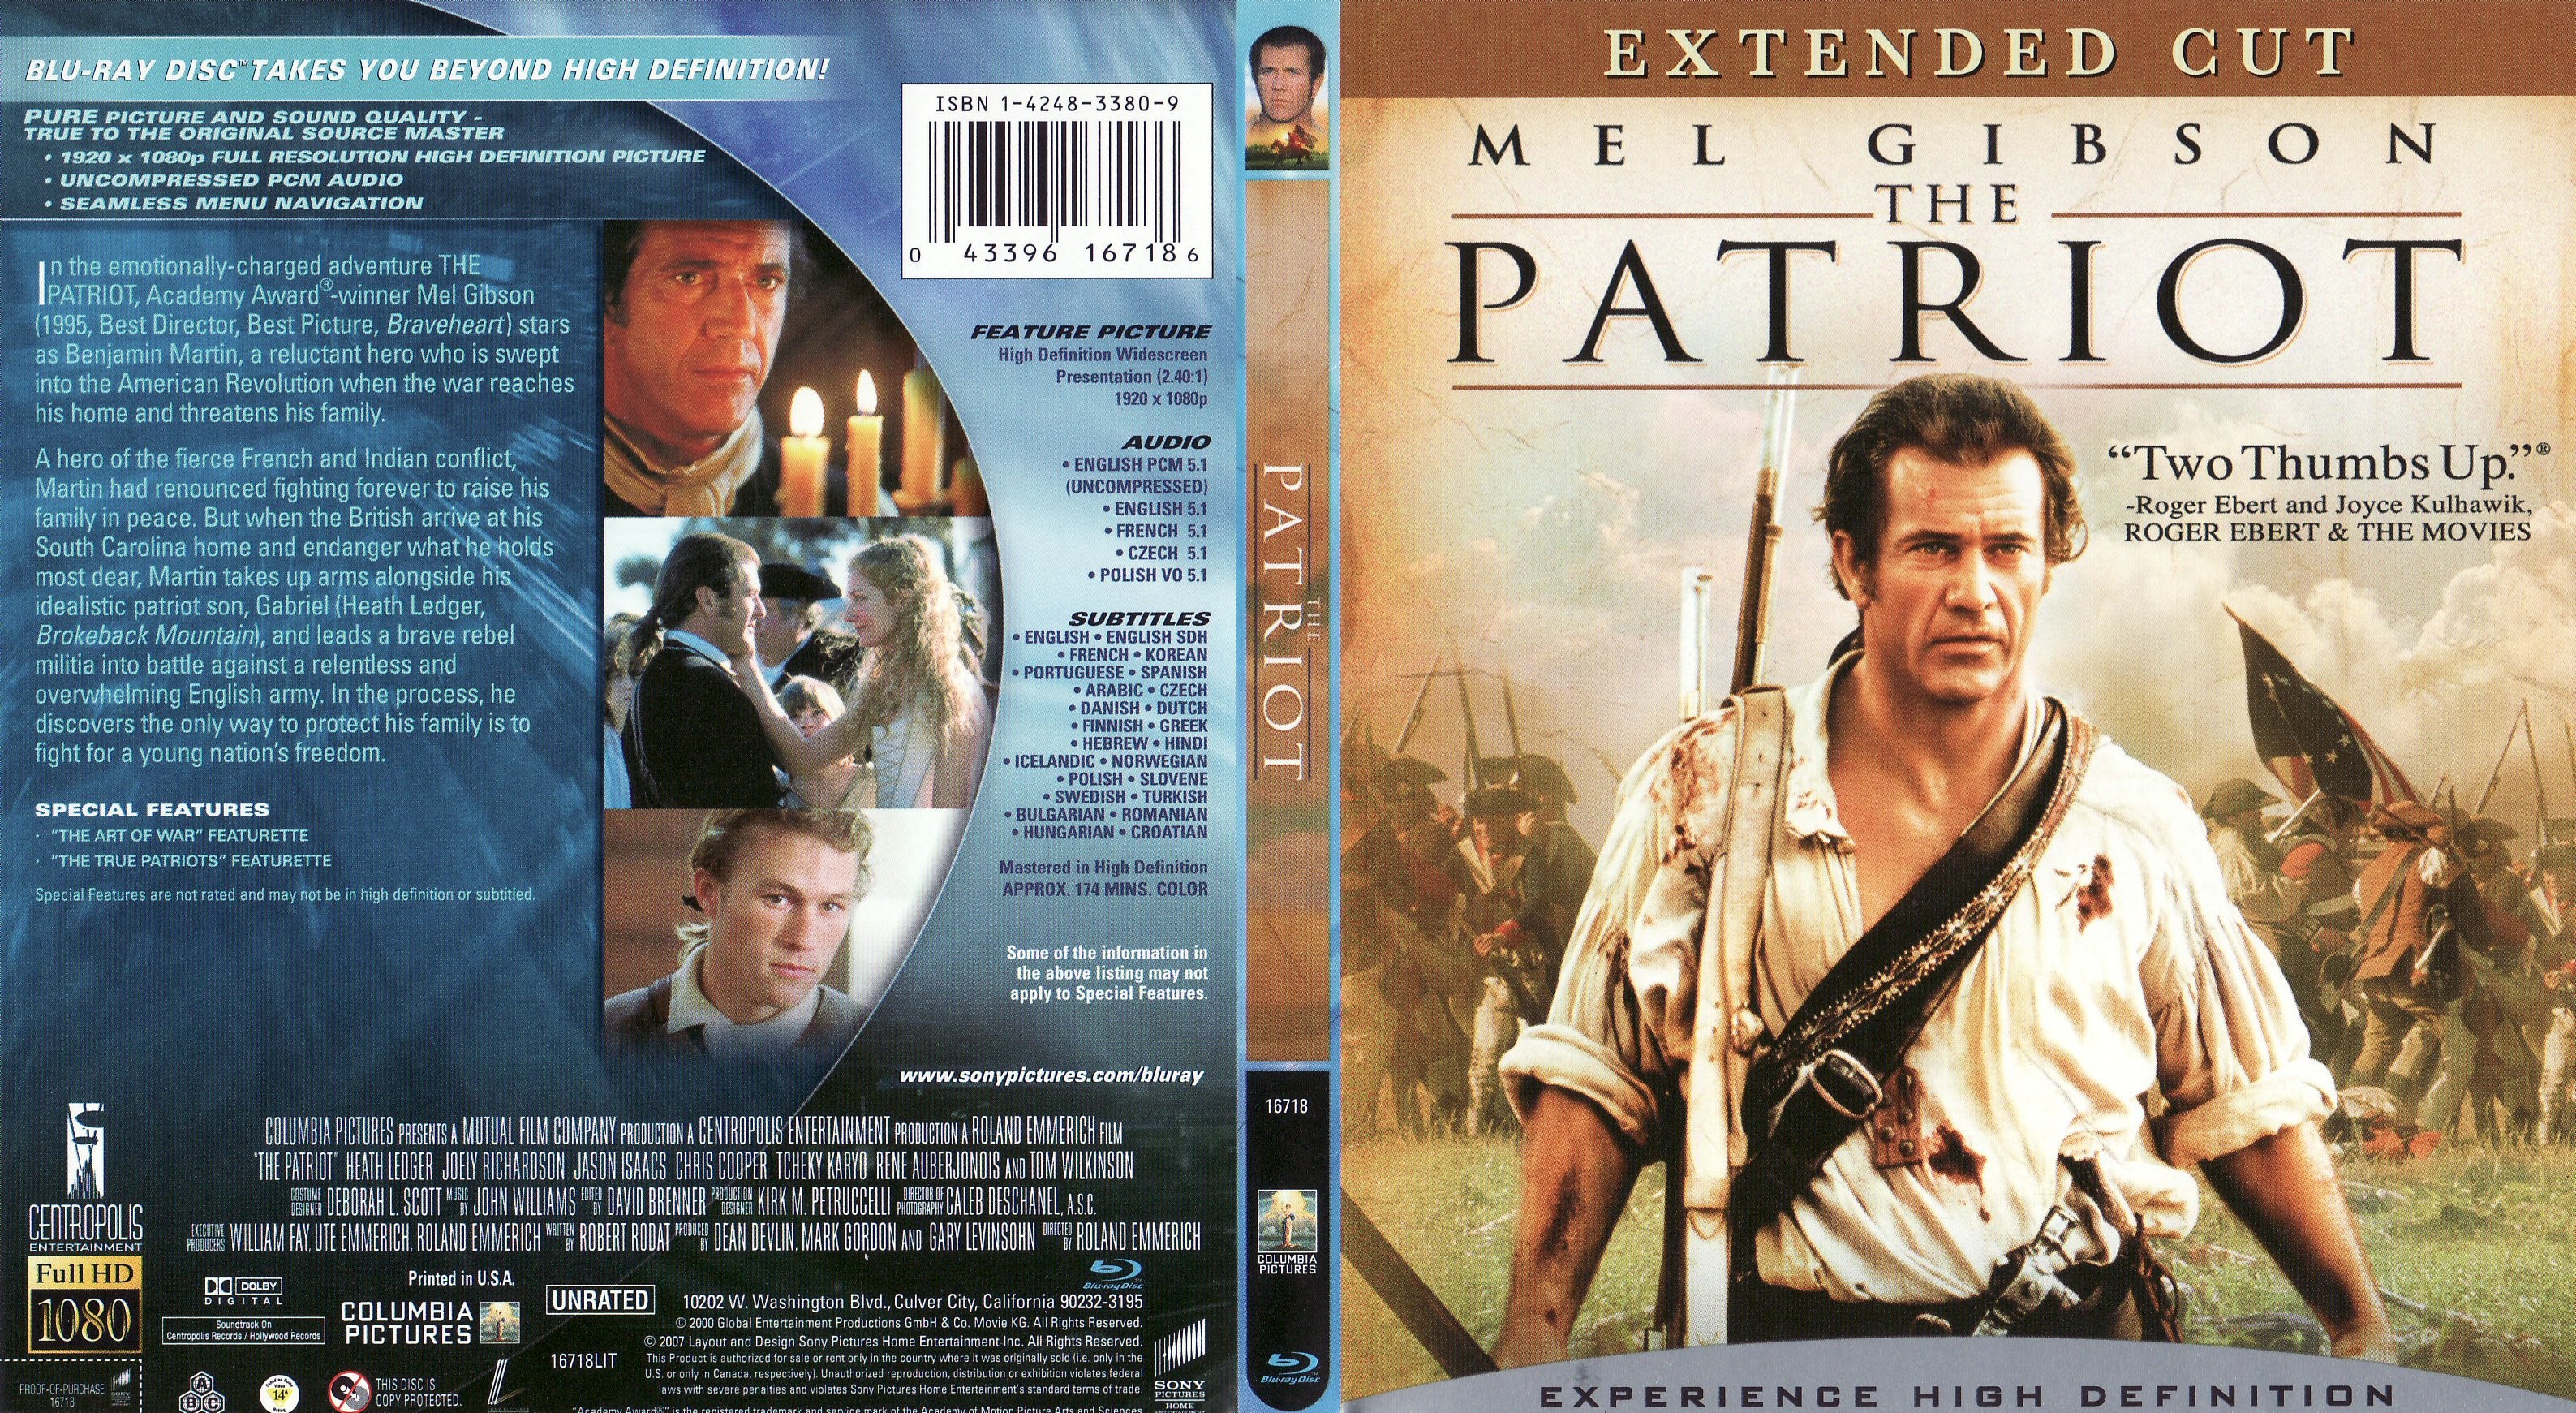 Jaquette DVD The patriot - Le patriote (Canadienne) (BLU-RAY)